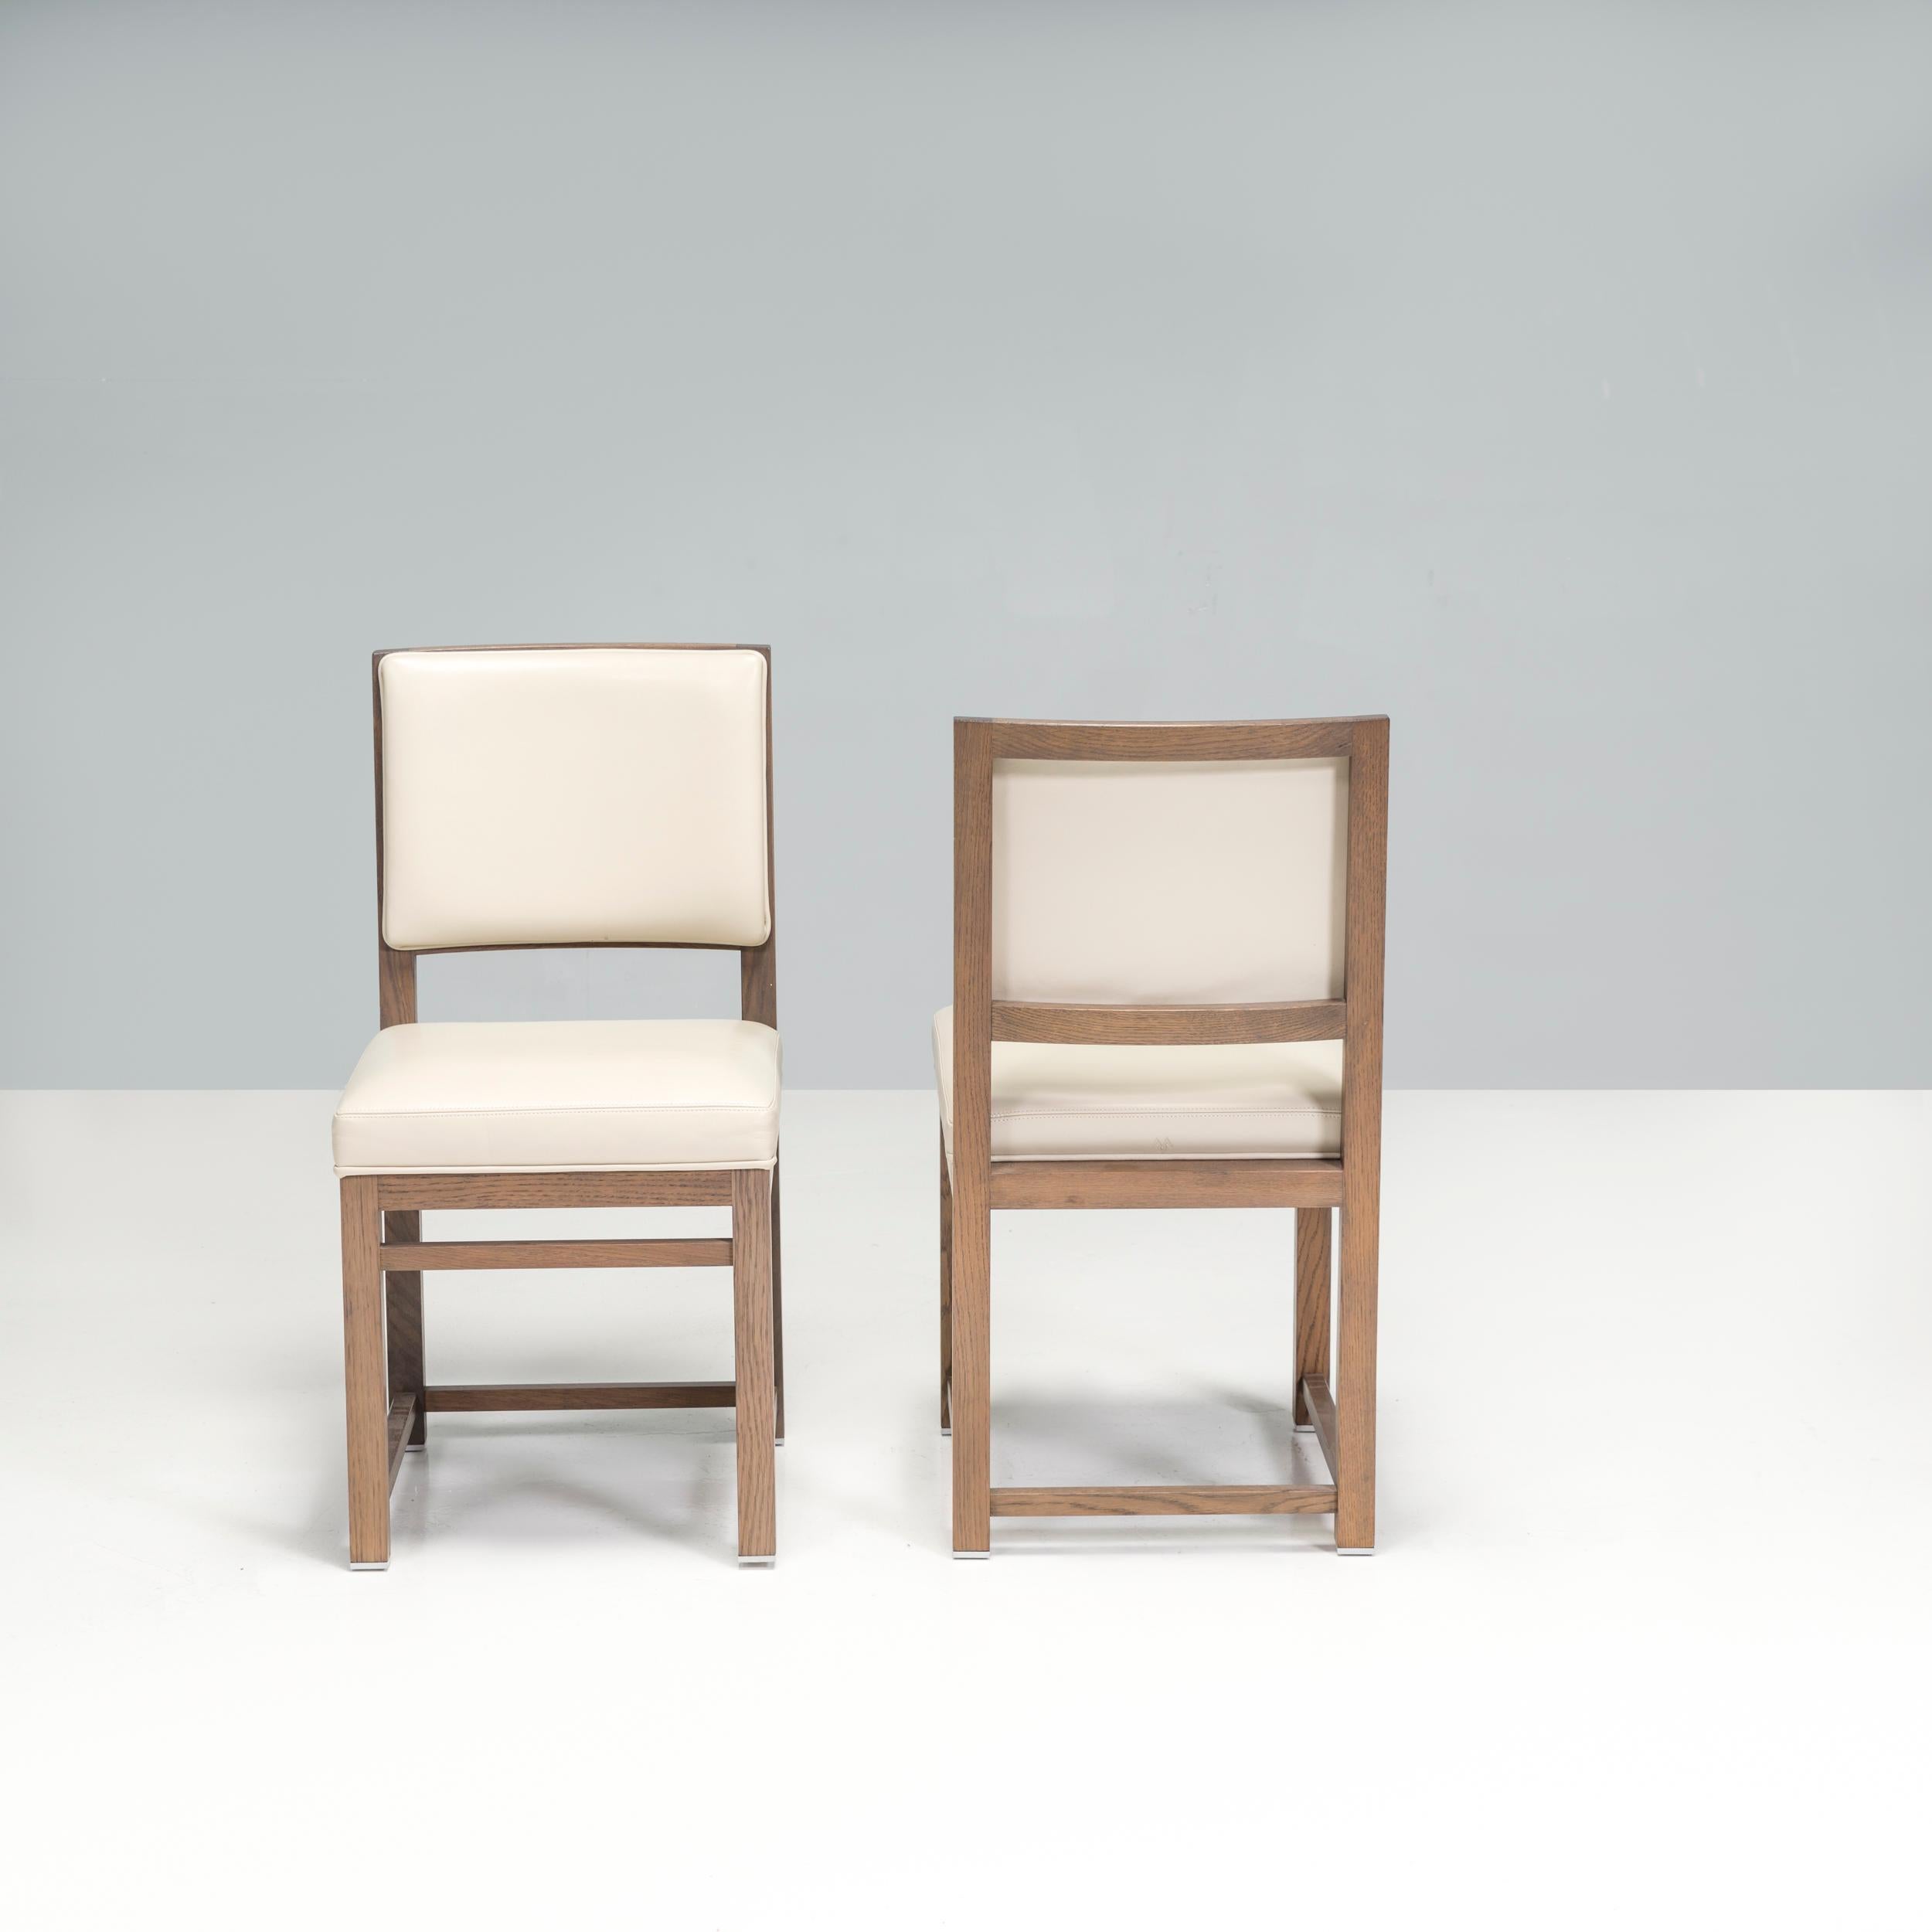 Antonio Citterio for Maxalto Musa Oak & Leather Dining Chairs, Set of 2 In Good Condition For Sale In London, GB